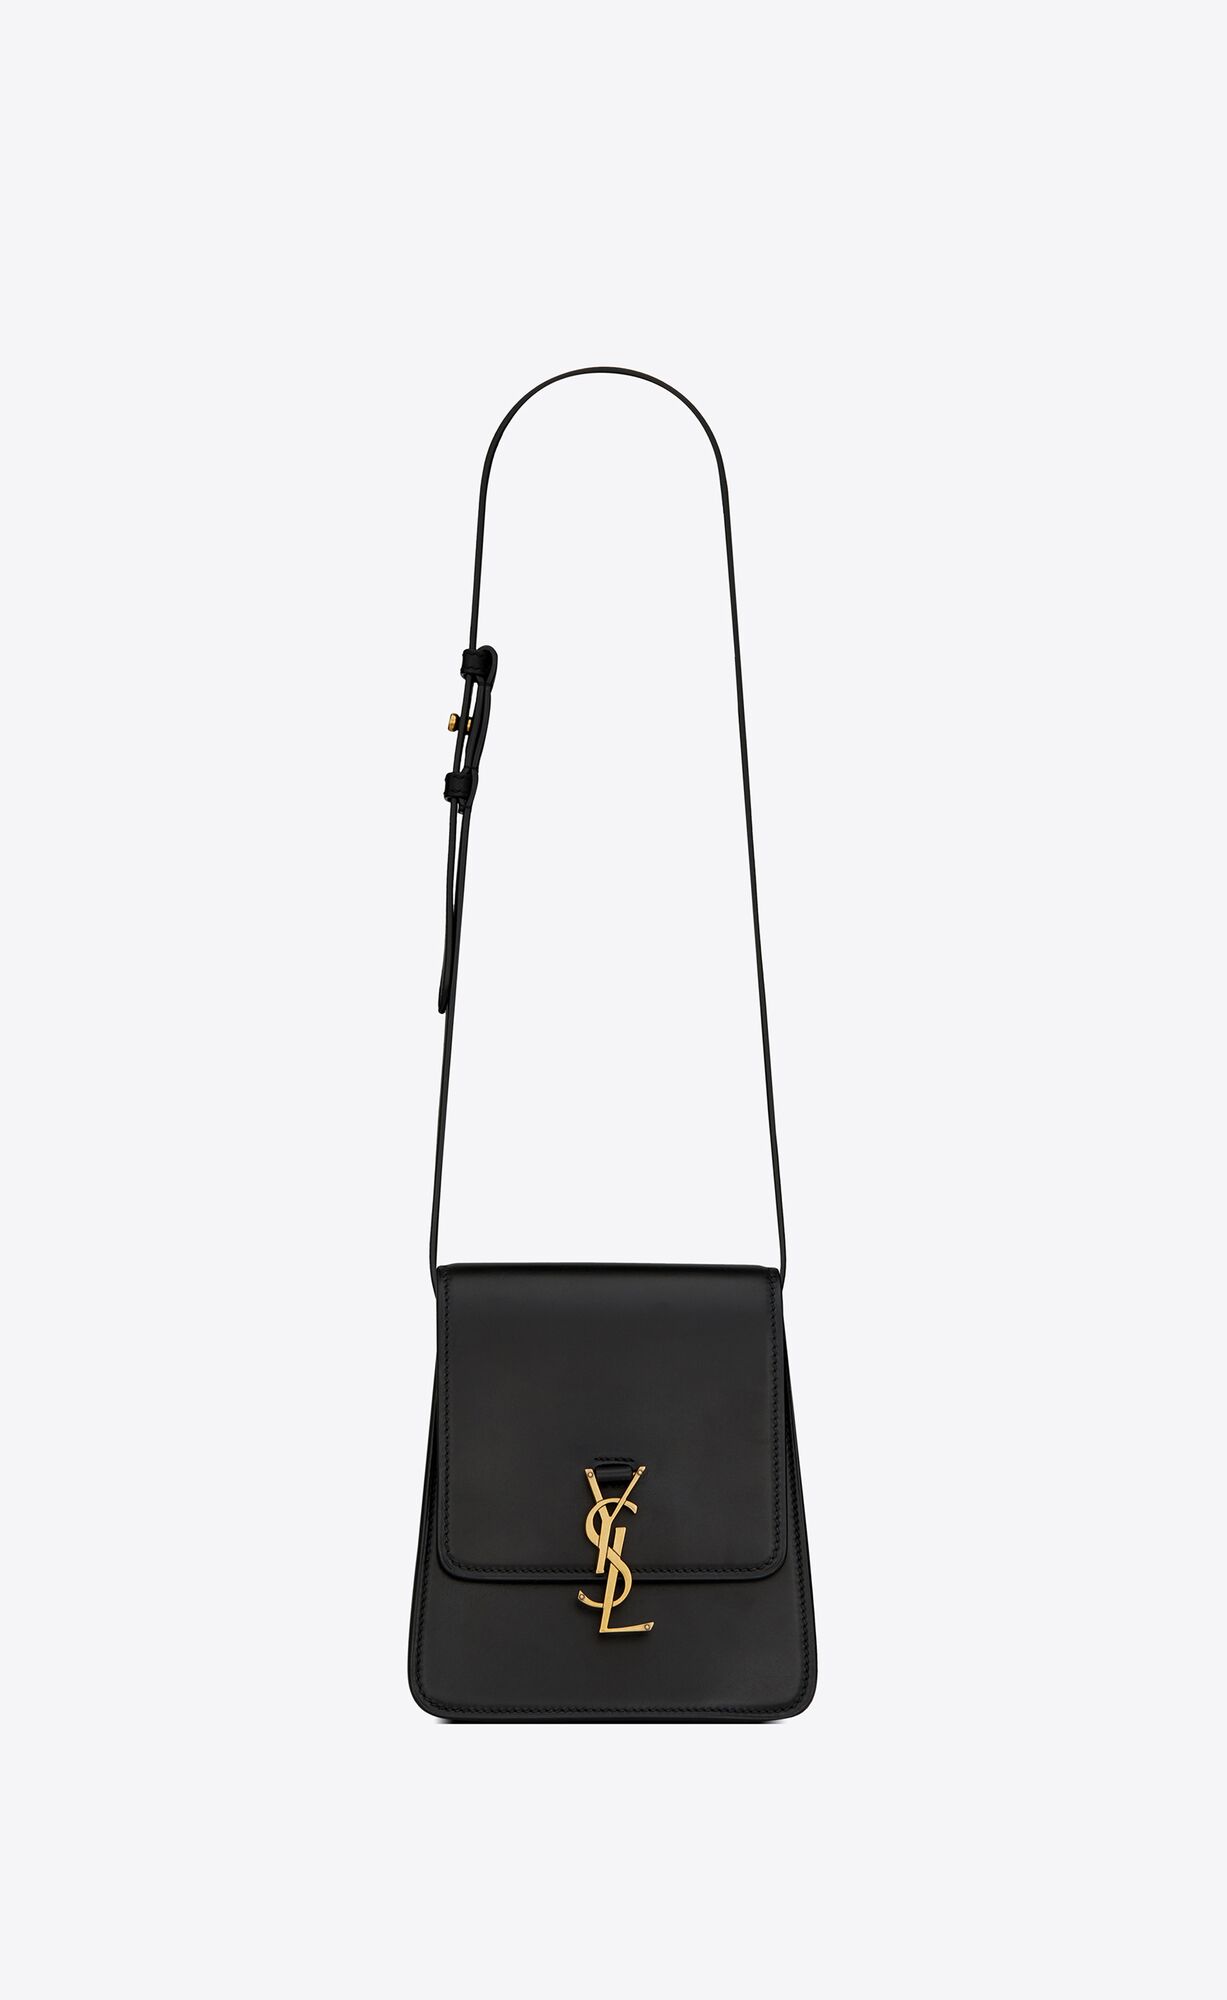 Saint Laurent Kaia North/south Satchel In Vegetable-tanned Leather – Black – 668809BWR0W1000